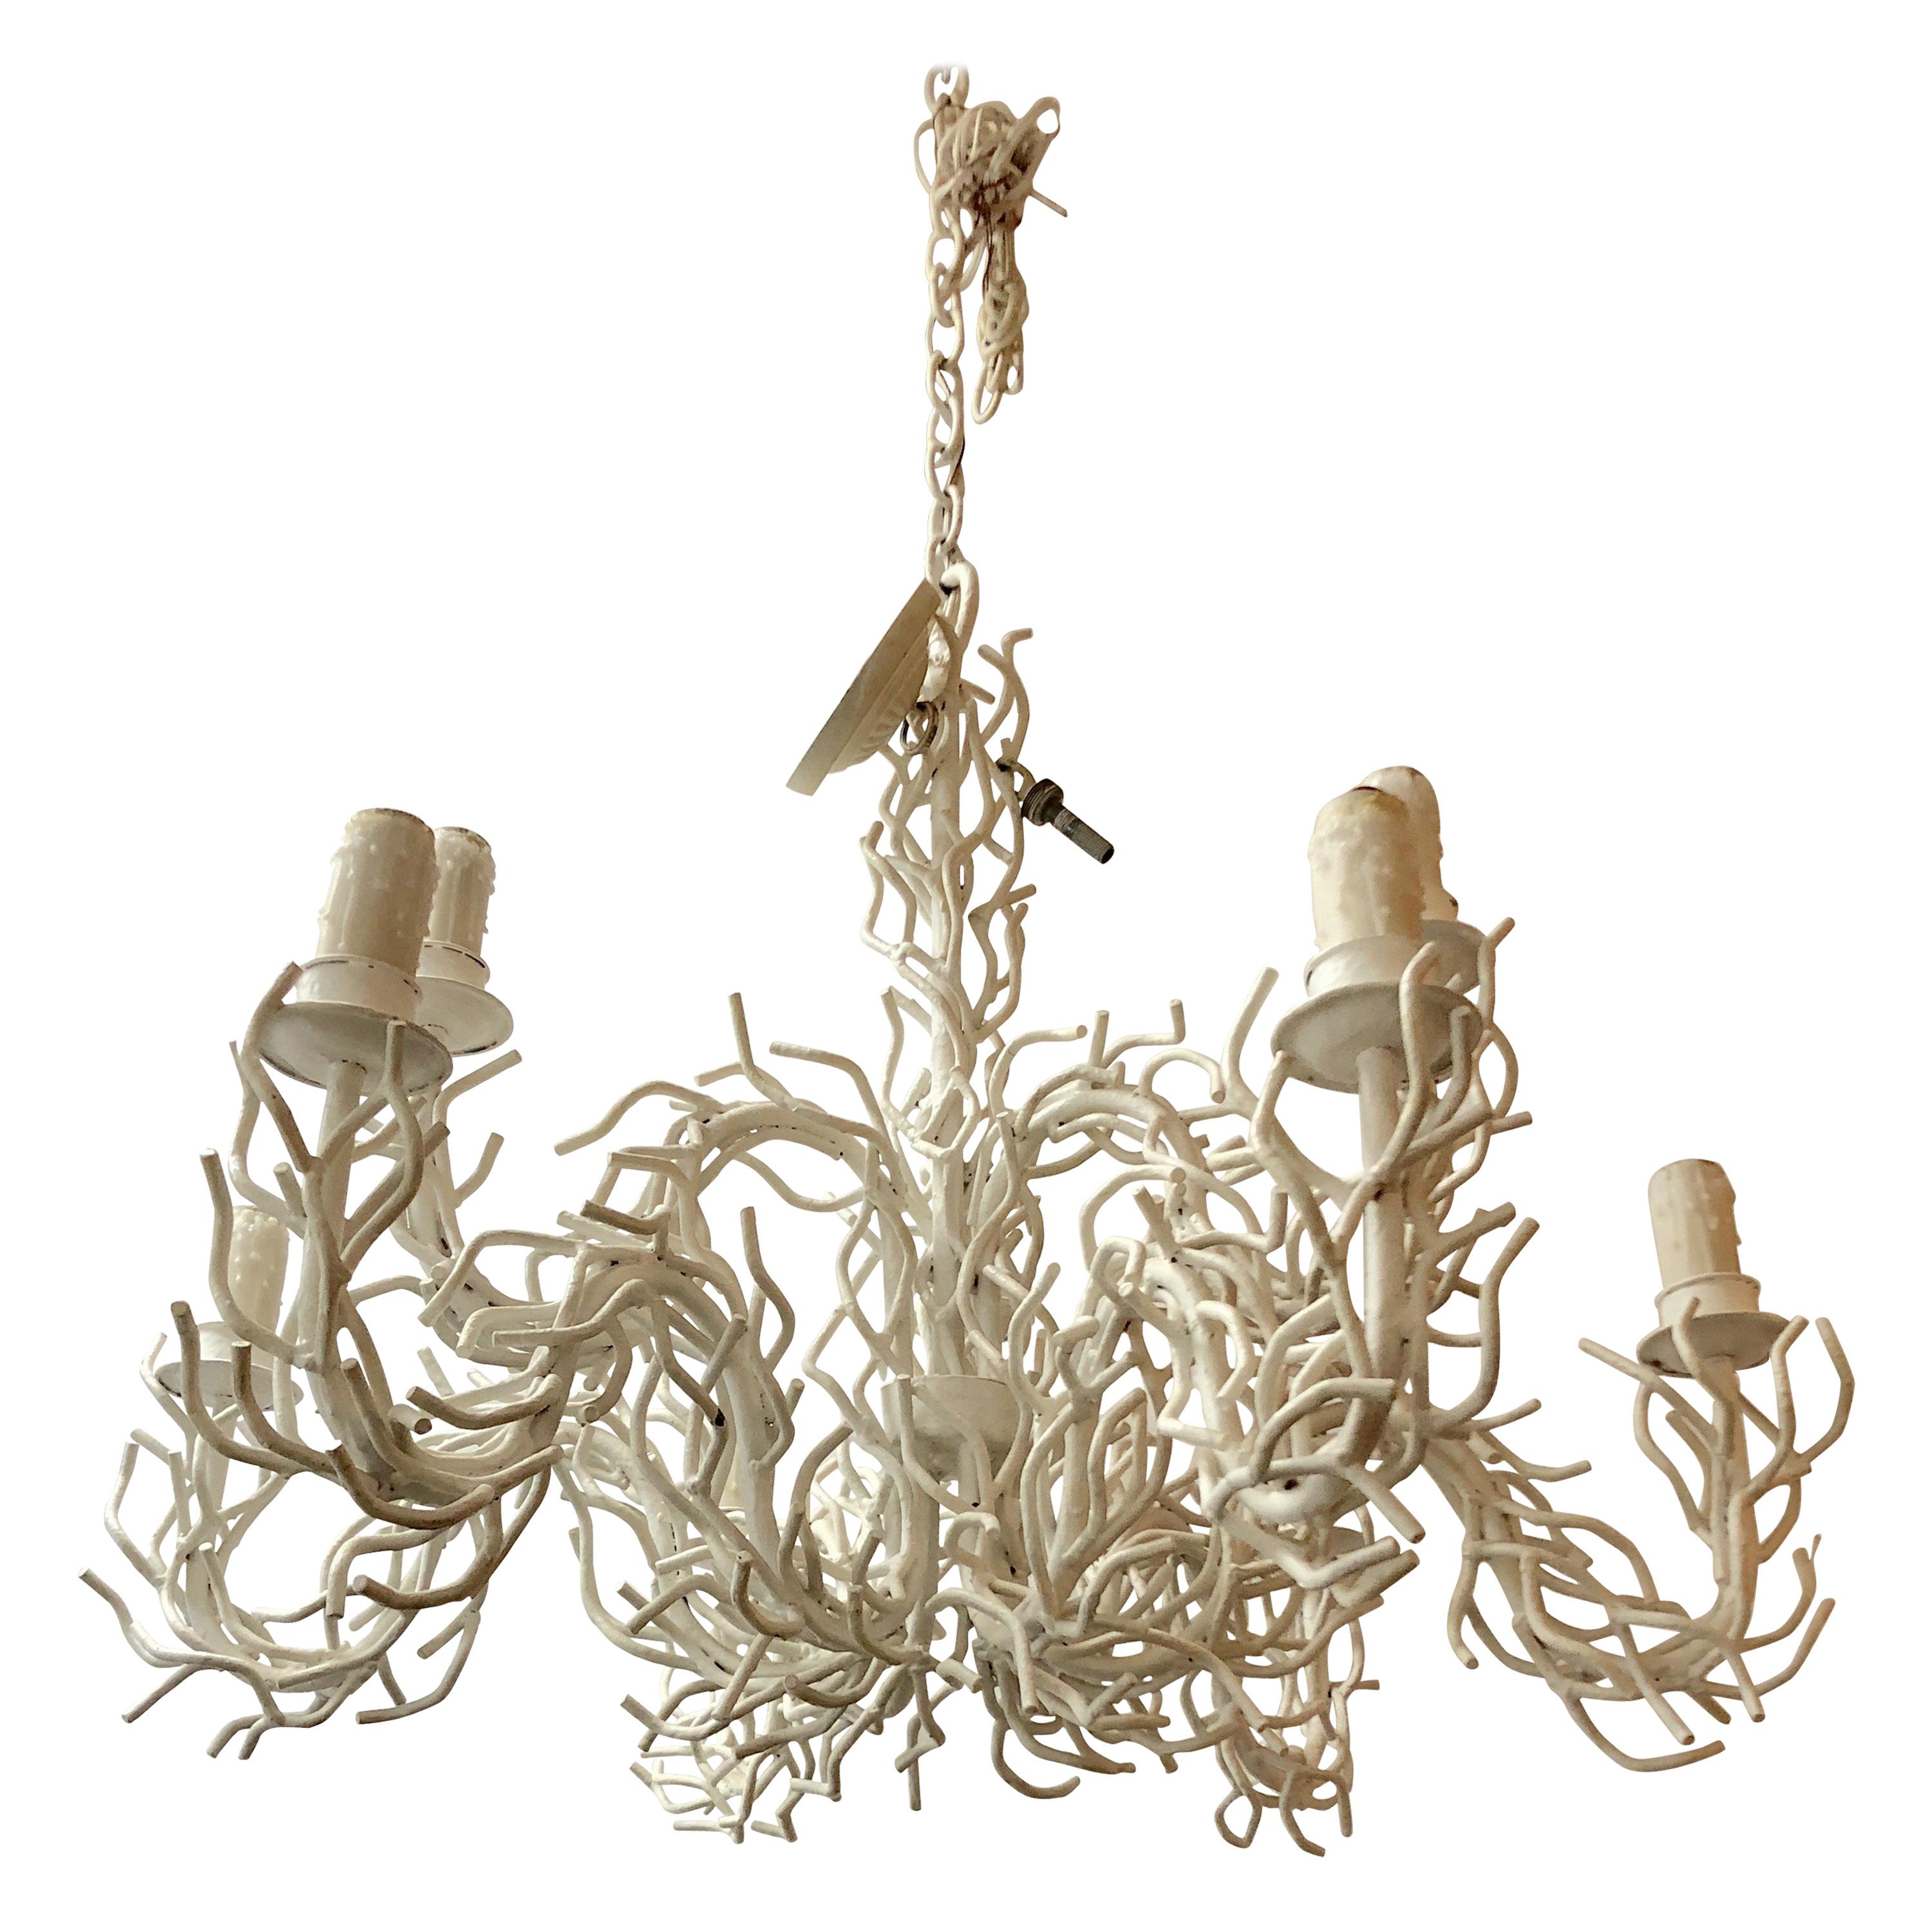 Truly Sensational Huge White Iron Faux Coral Two-Tier Chandelier For Sale